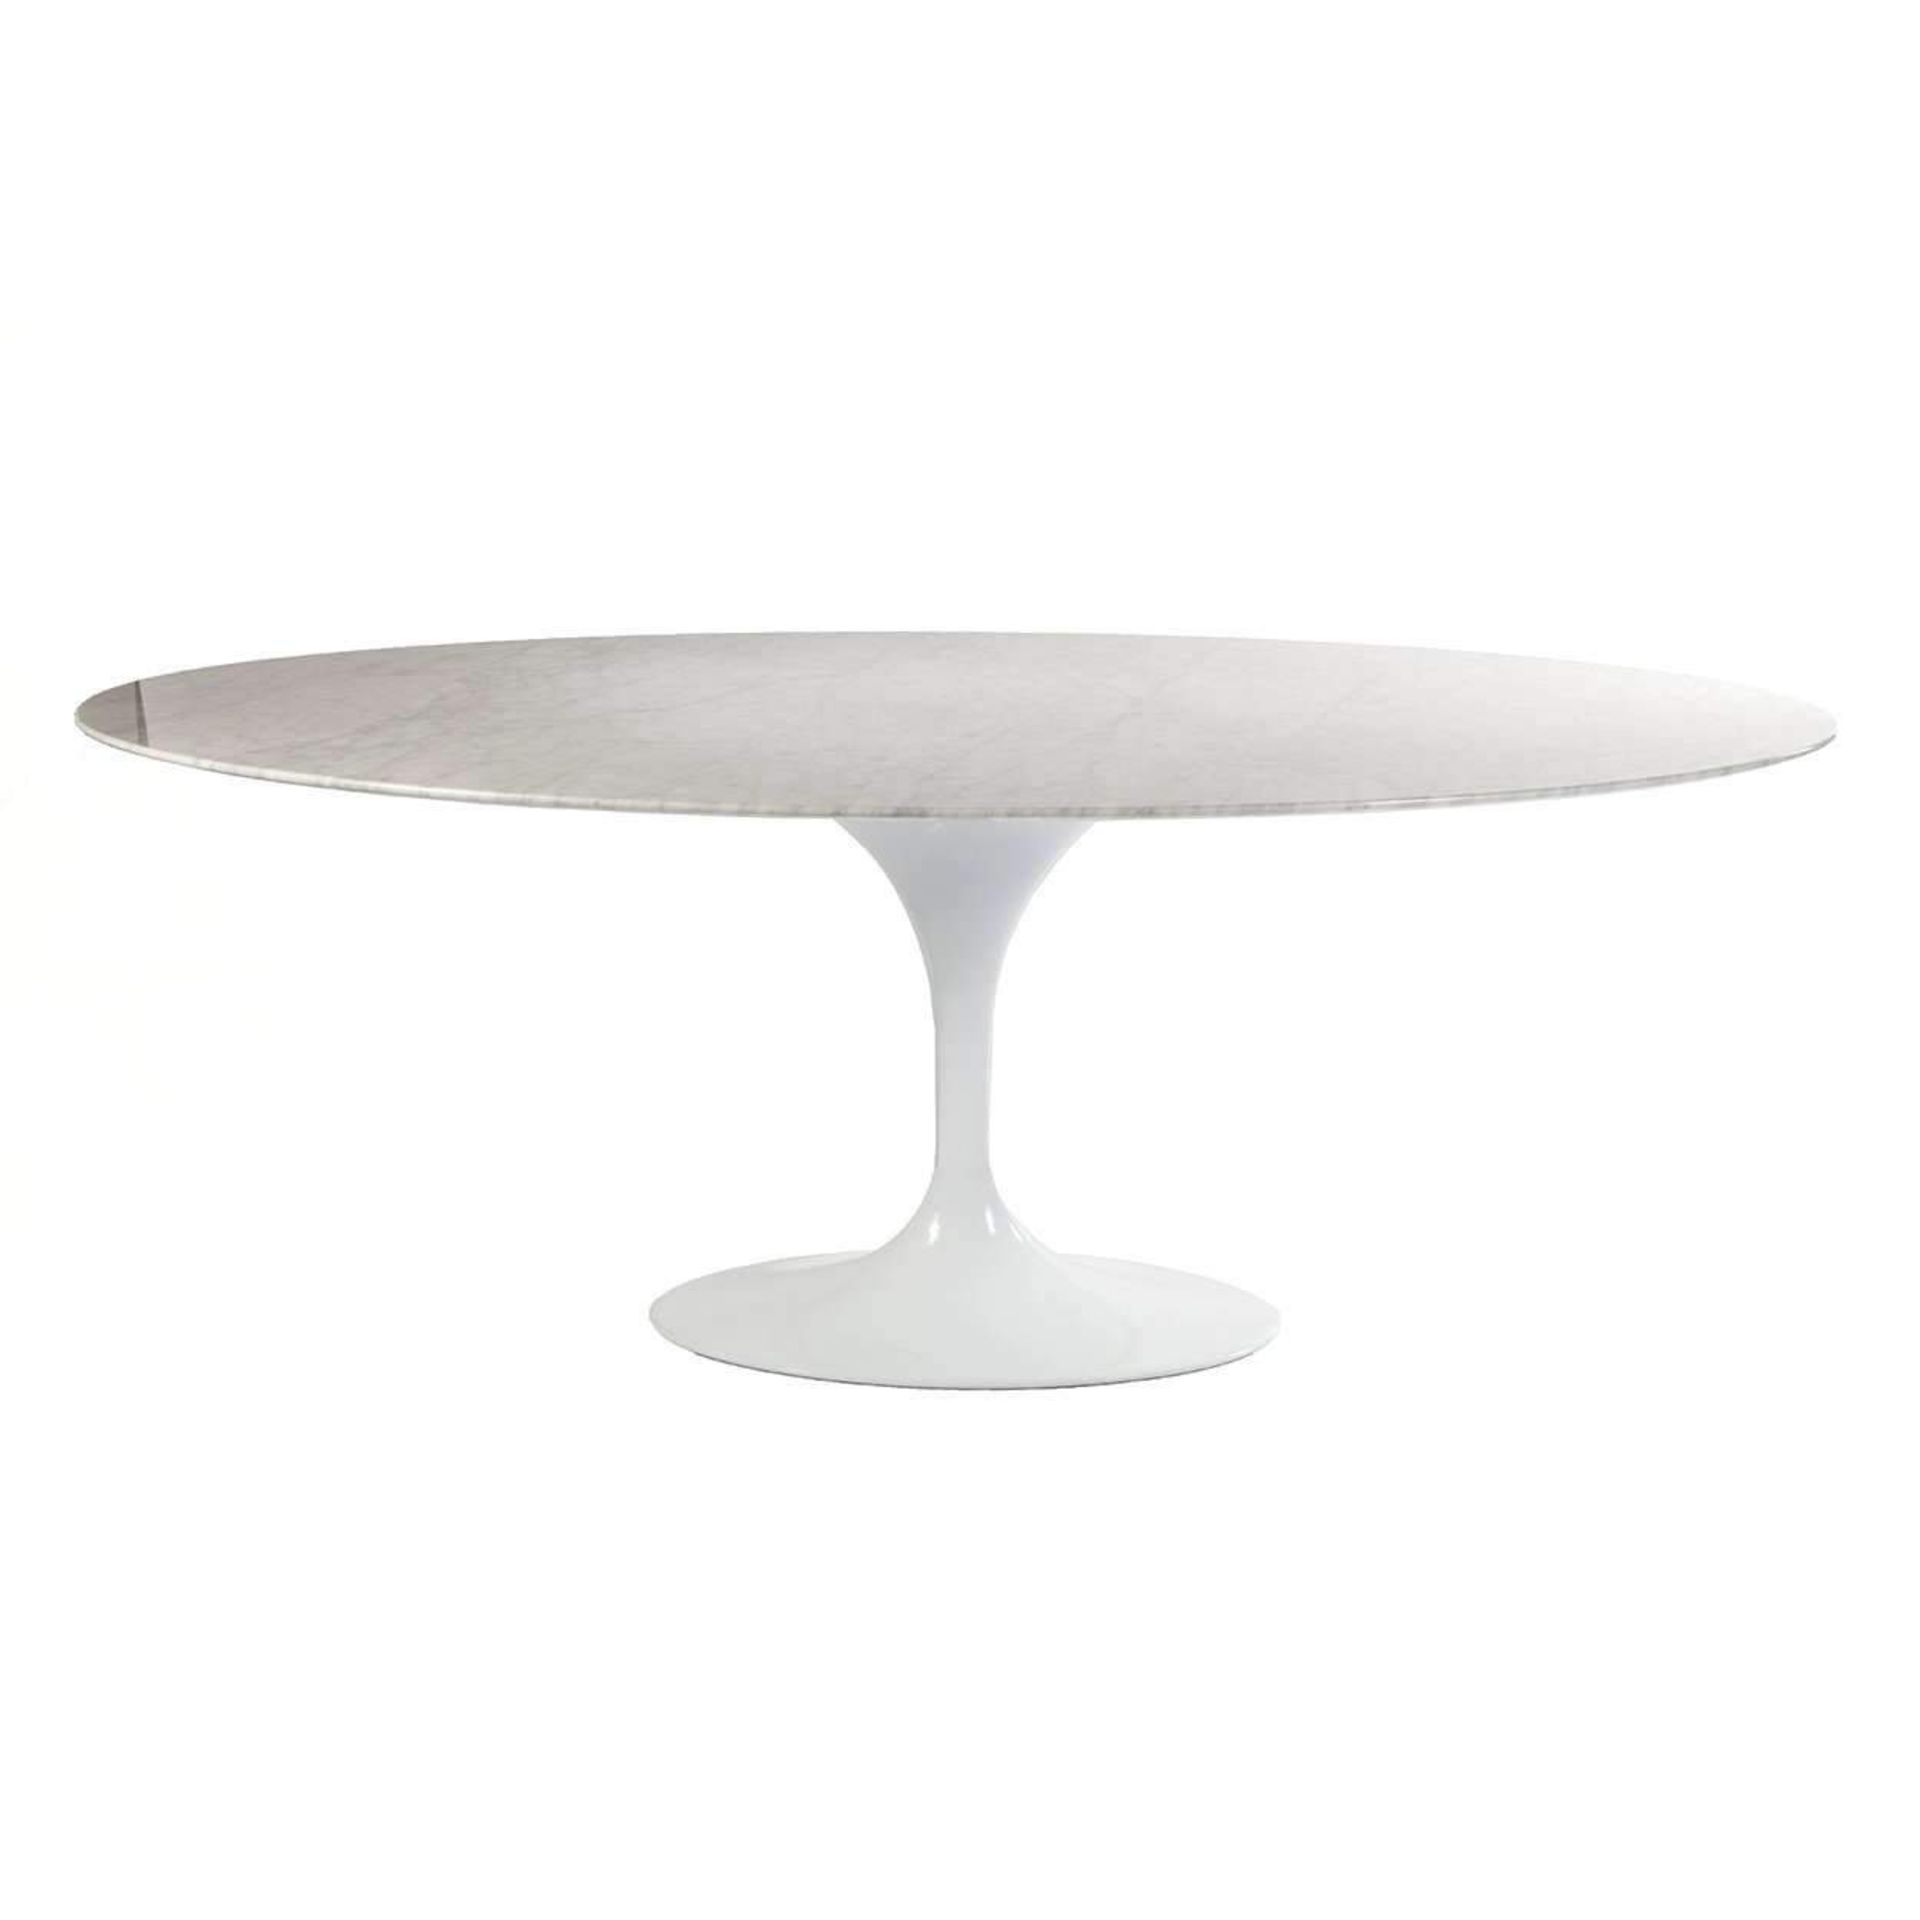 1 x Eero Saarinen Inspired Carrara Marble Tulip Dining Table - 1950's Reproduction Oval Dining Table - Image 3 of 5